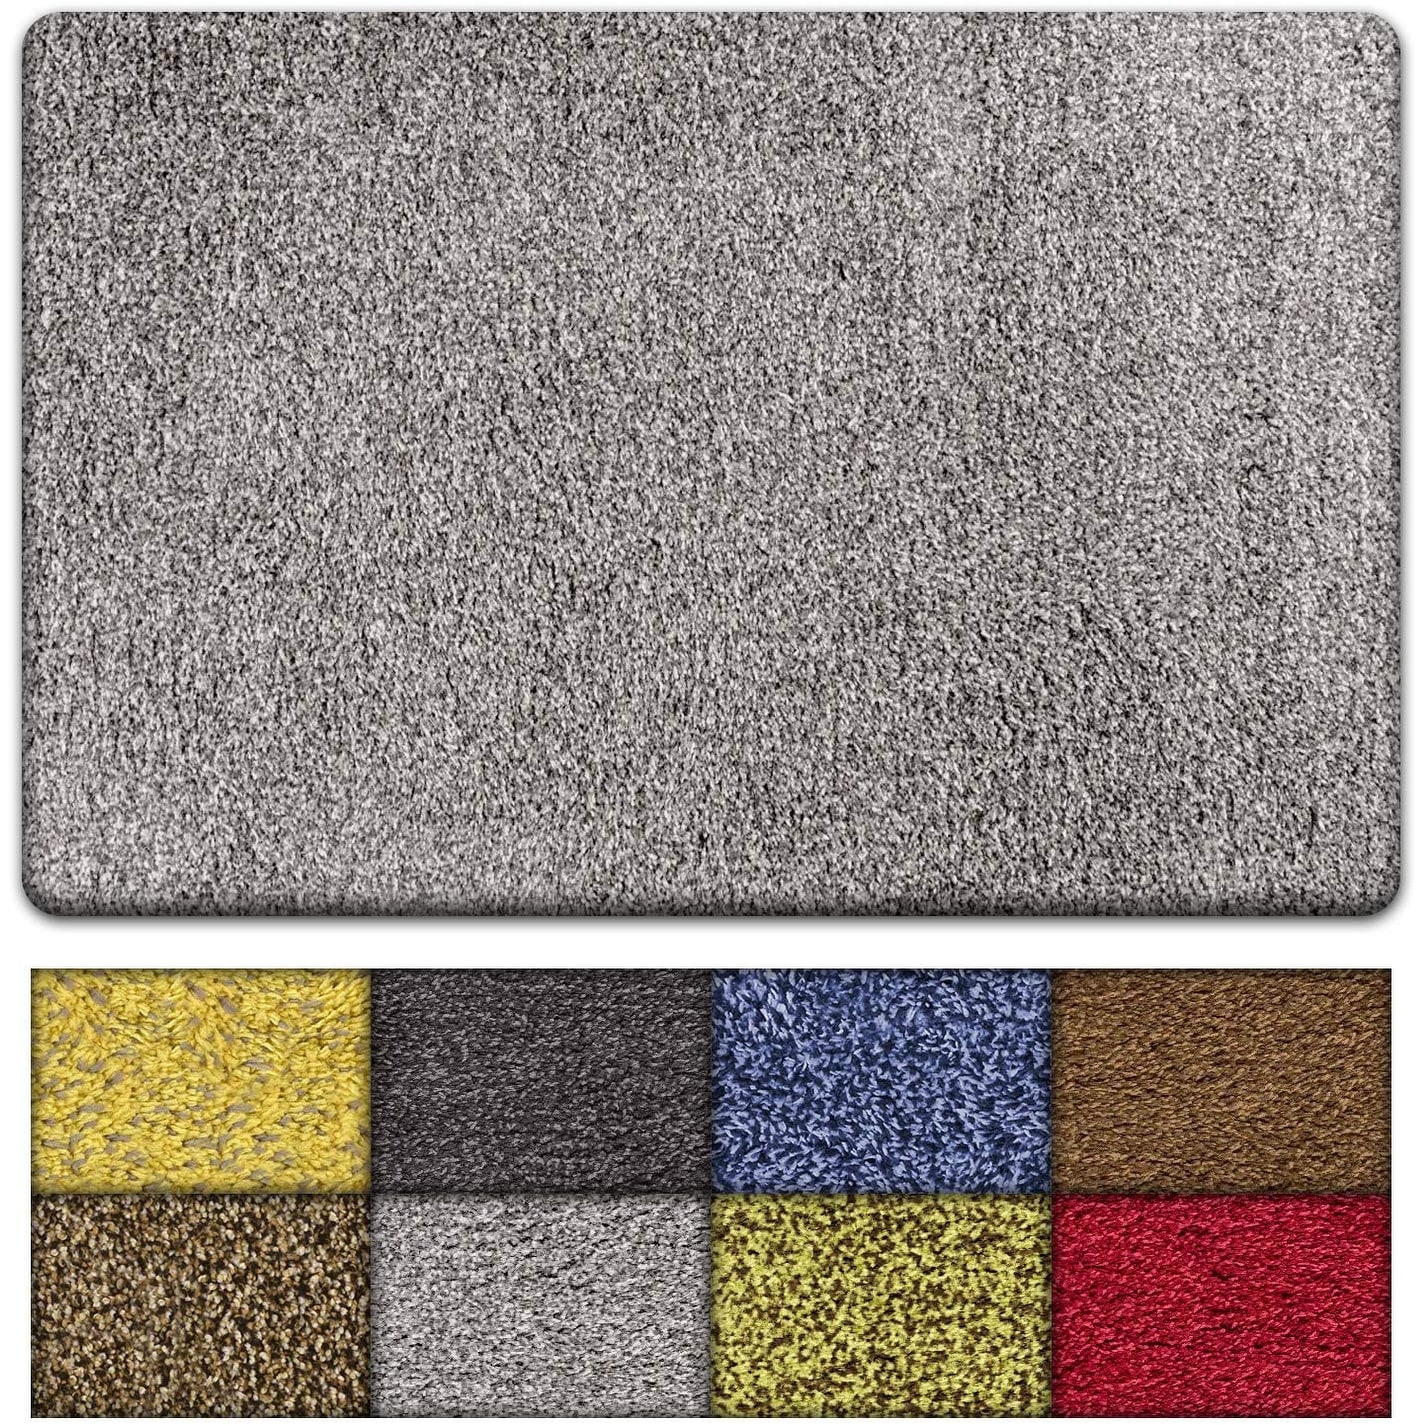 Absorbent Water SIGOUYI Modern Non-Slip 18x30in Area Rug Low Profile Door Mat with Rubber Backing for Corrider Bathroom Bedroom Living Room Entry Vintage Blue Texture 